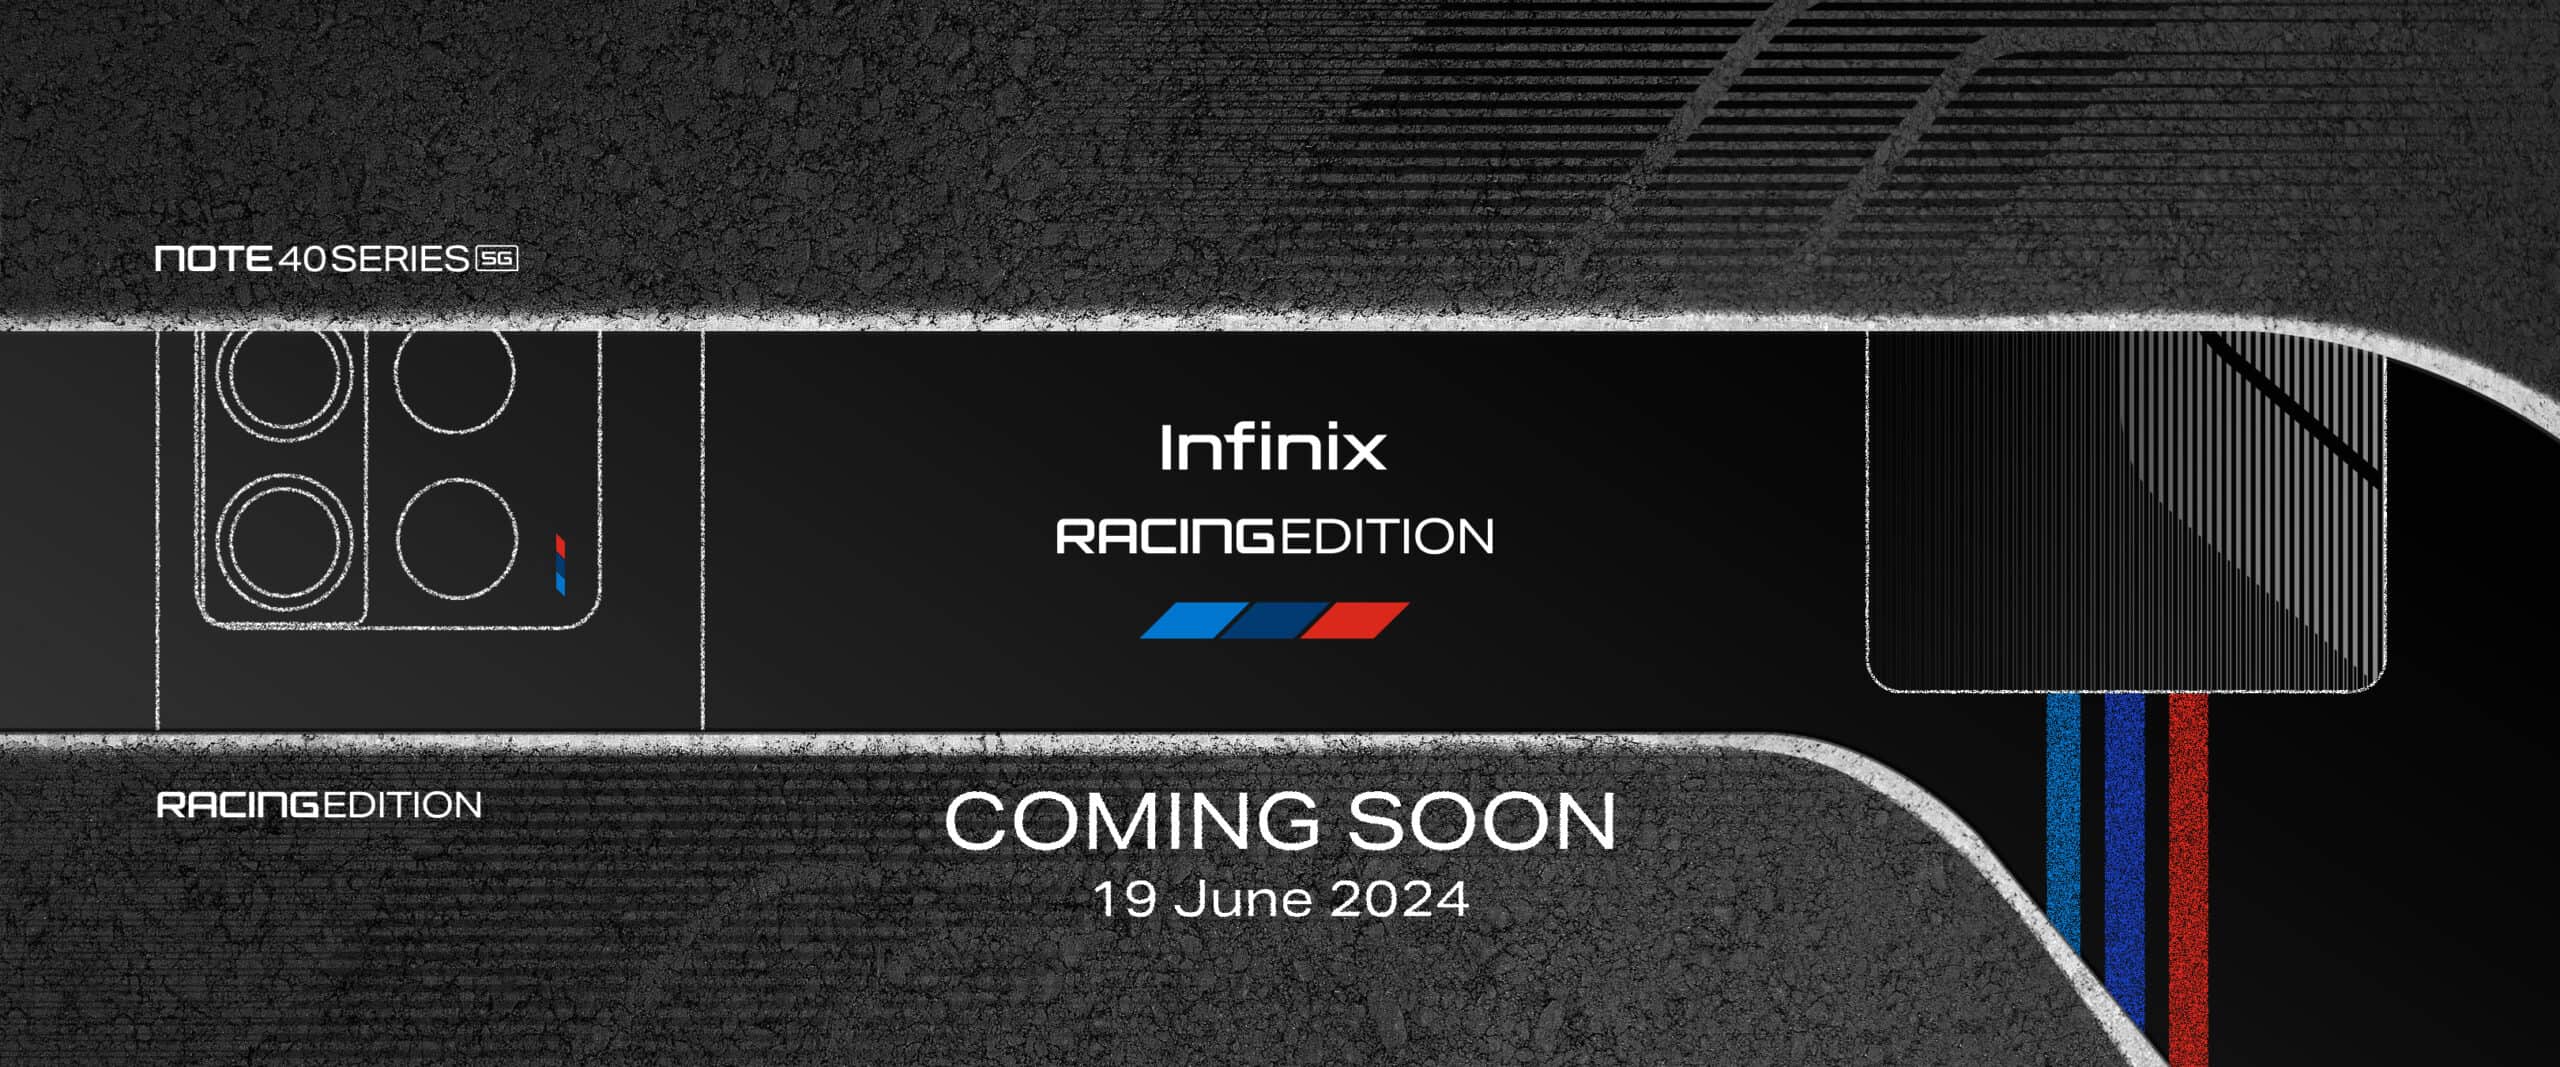 Infinix To Launch The Infinix Note 40 Series 5G Racing Edition Designed by BMW’s Designworks